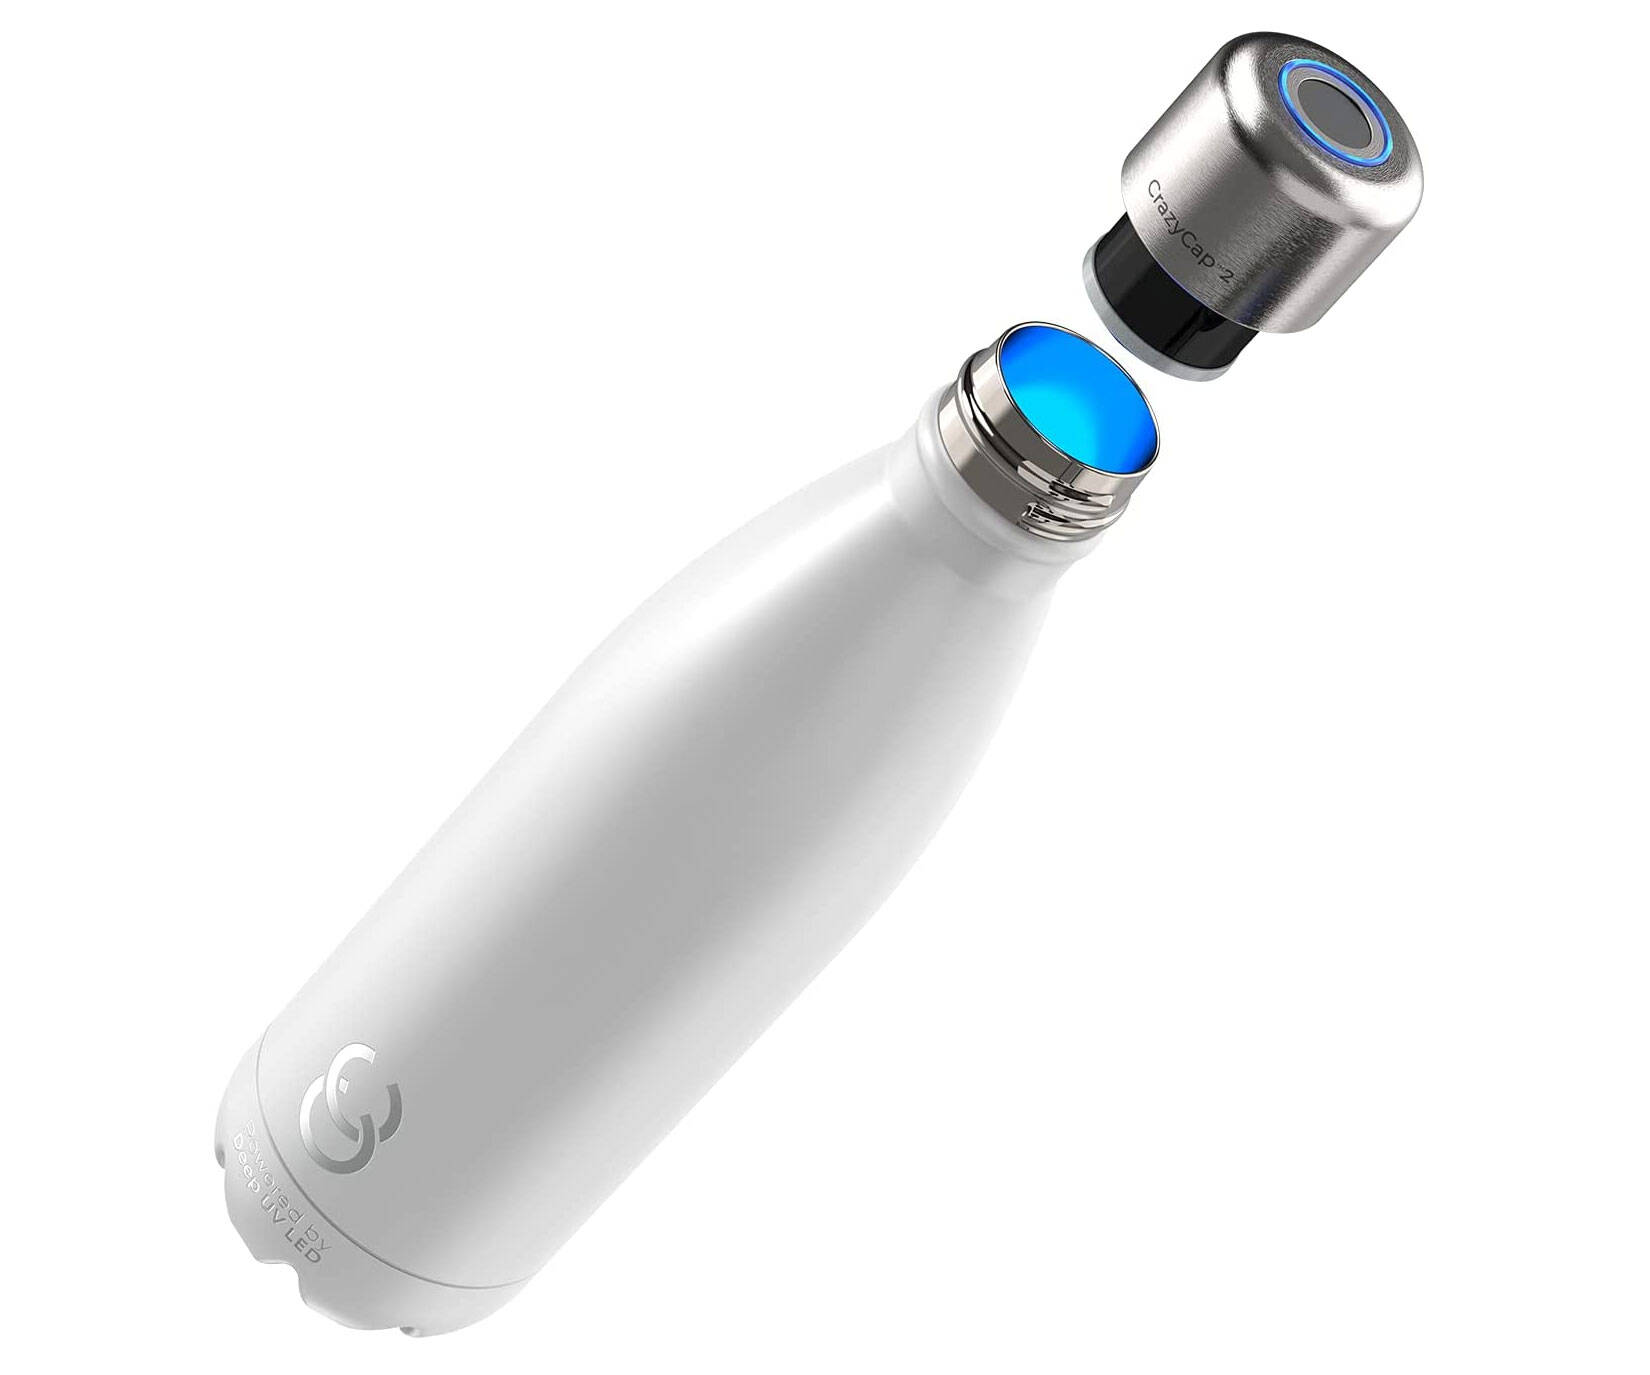 CrazyCap UV Self-Cleaning Water Bottle